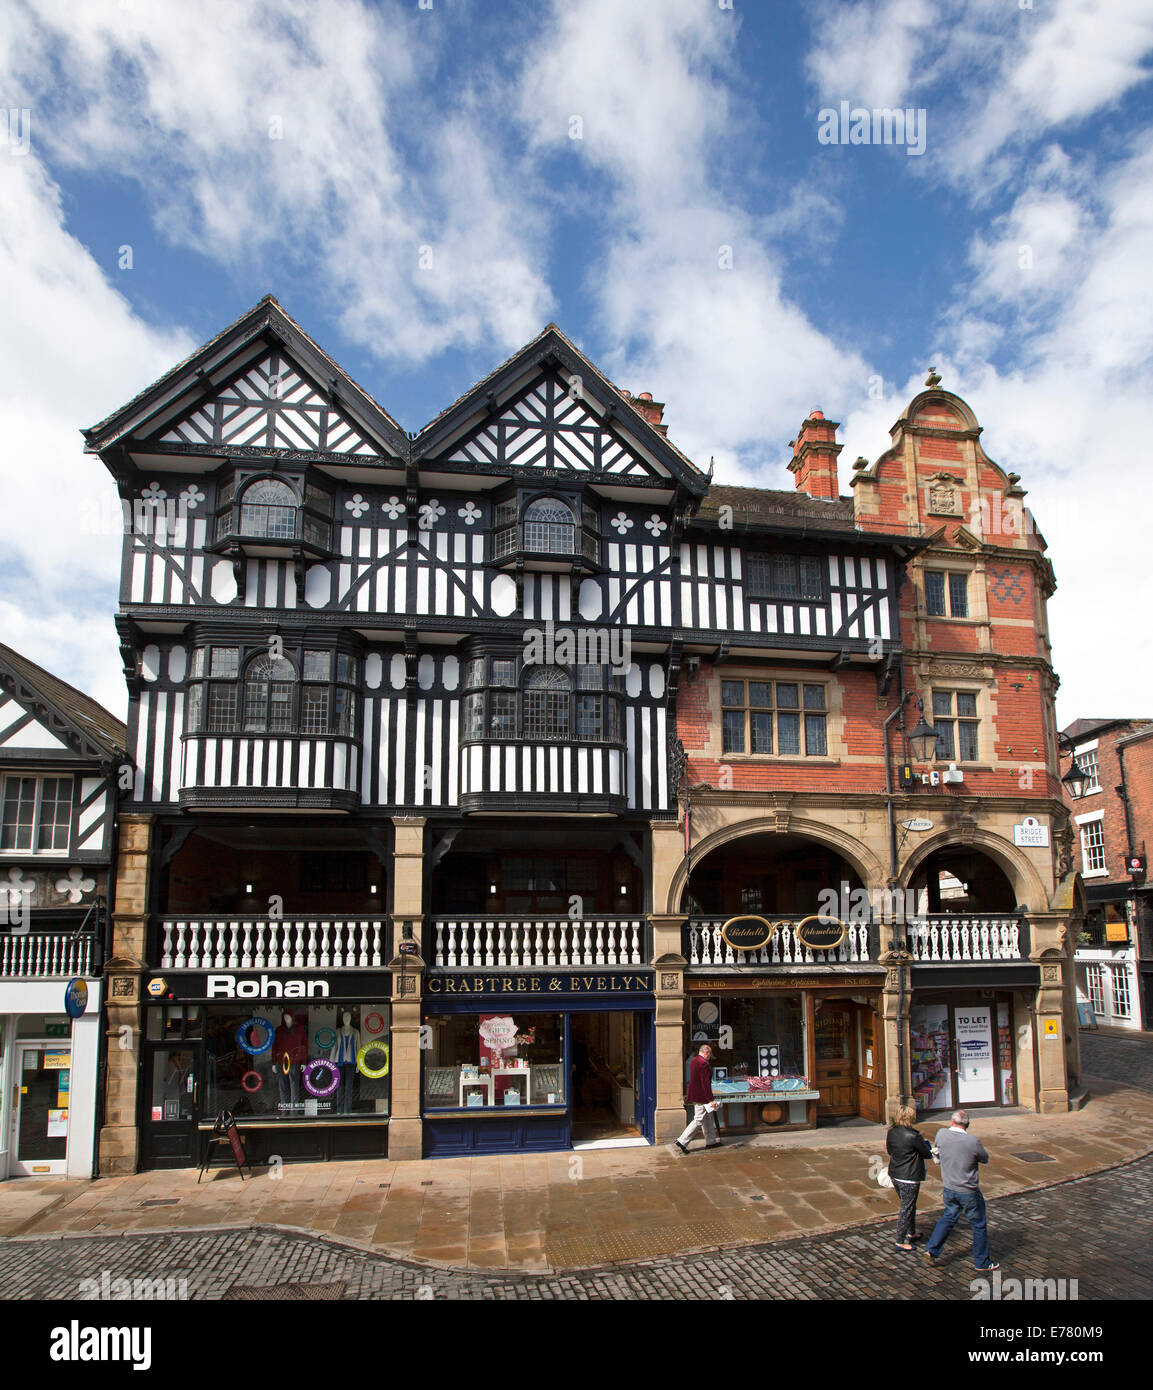 Iconic black & white 14th century heritage listed buildings beside more modern structures in historic English city of Chester Stock Photo